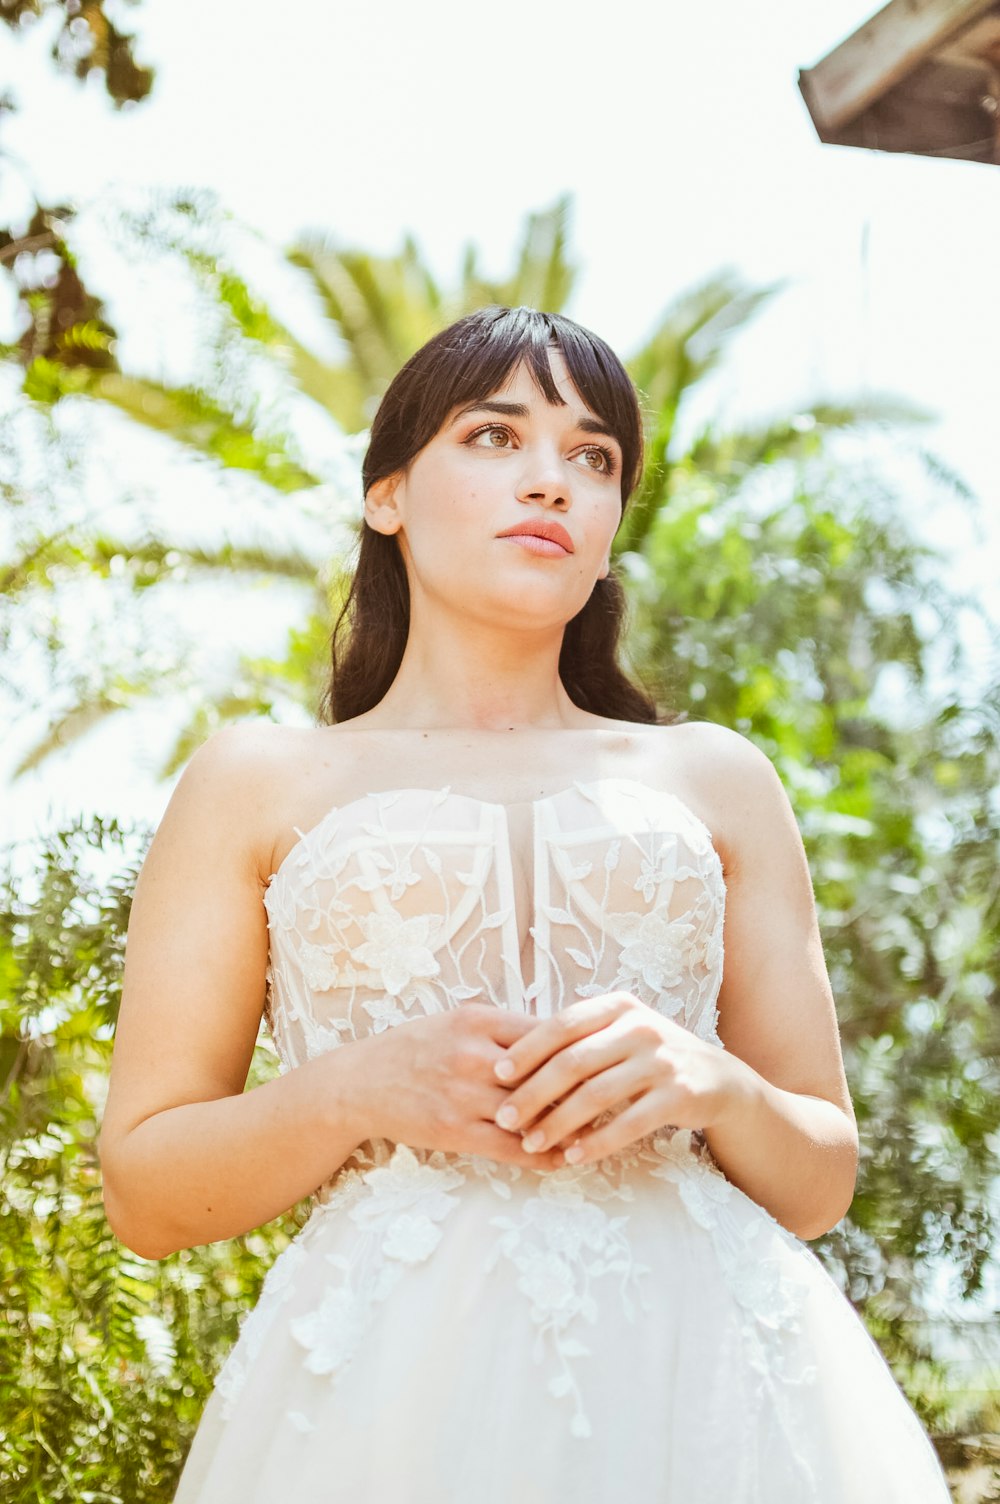 a woman in a wedding dress standing in front of trees